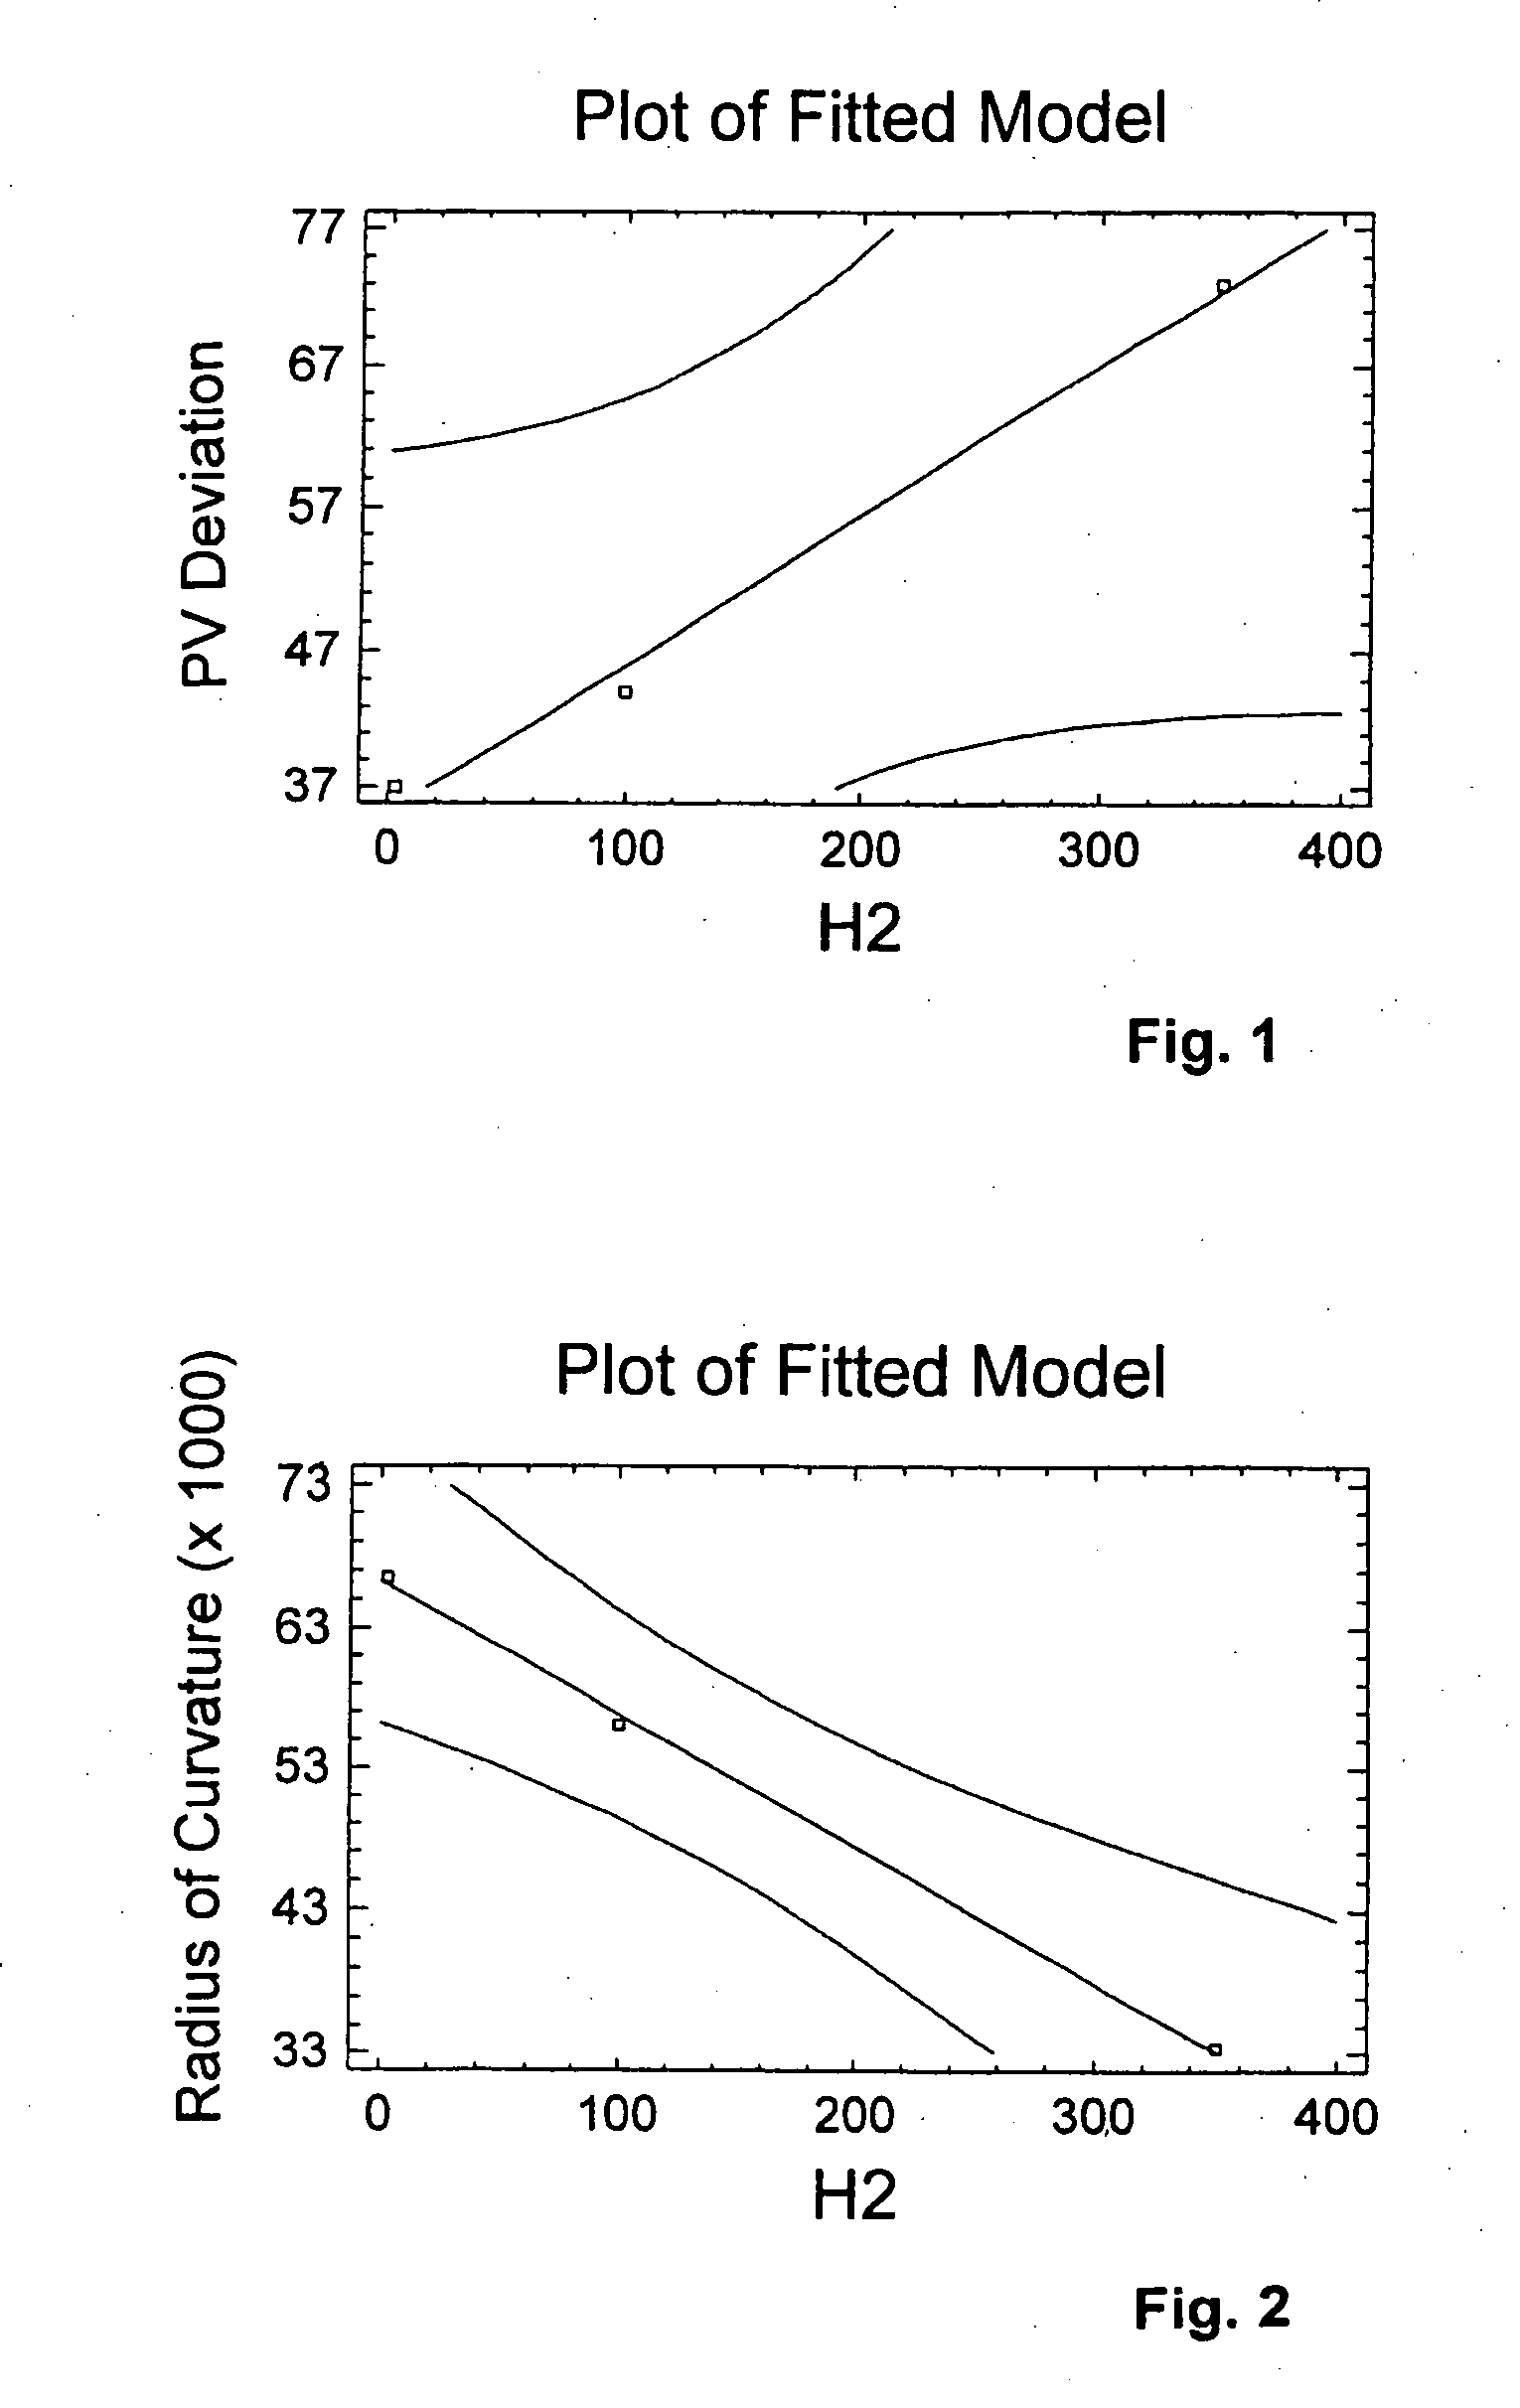 SiO2-TiO2 glass body with improved resistance to radiation